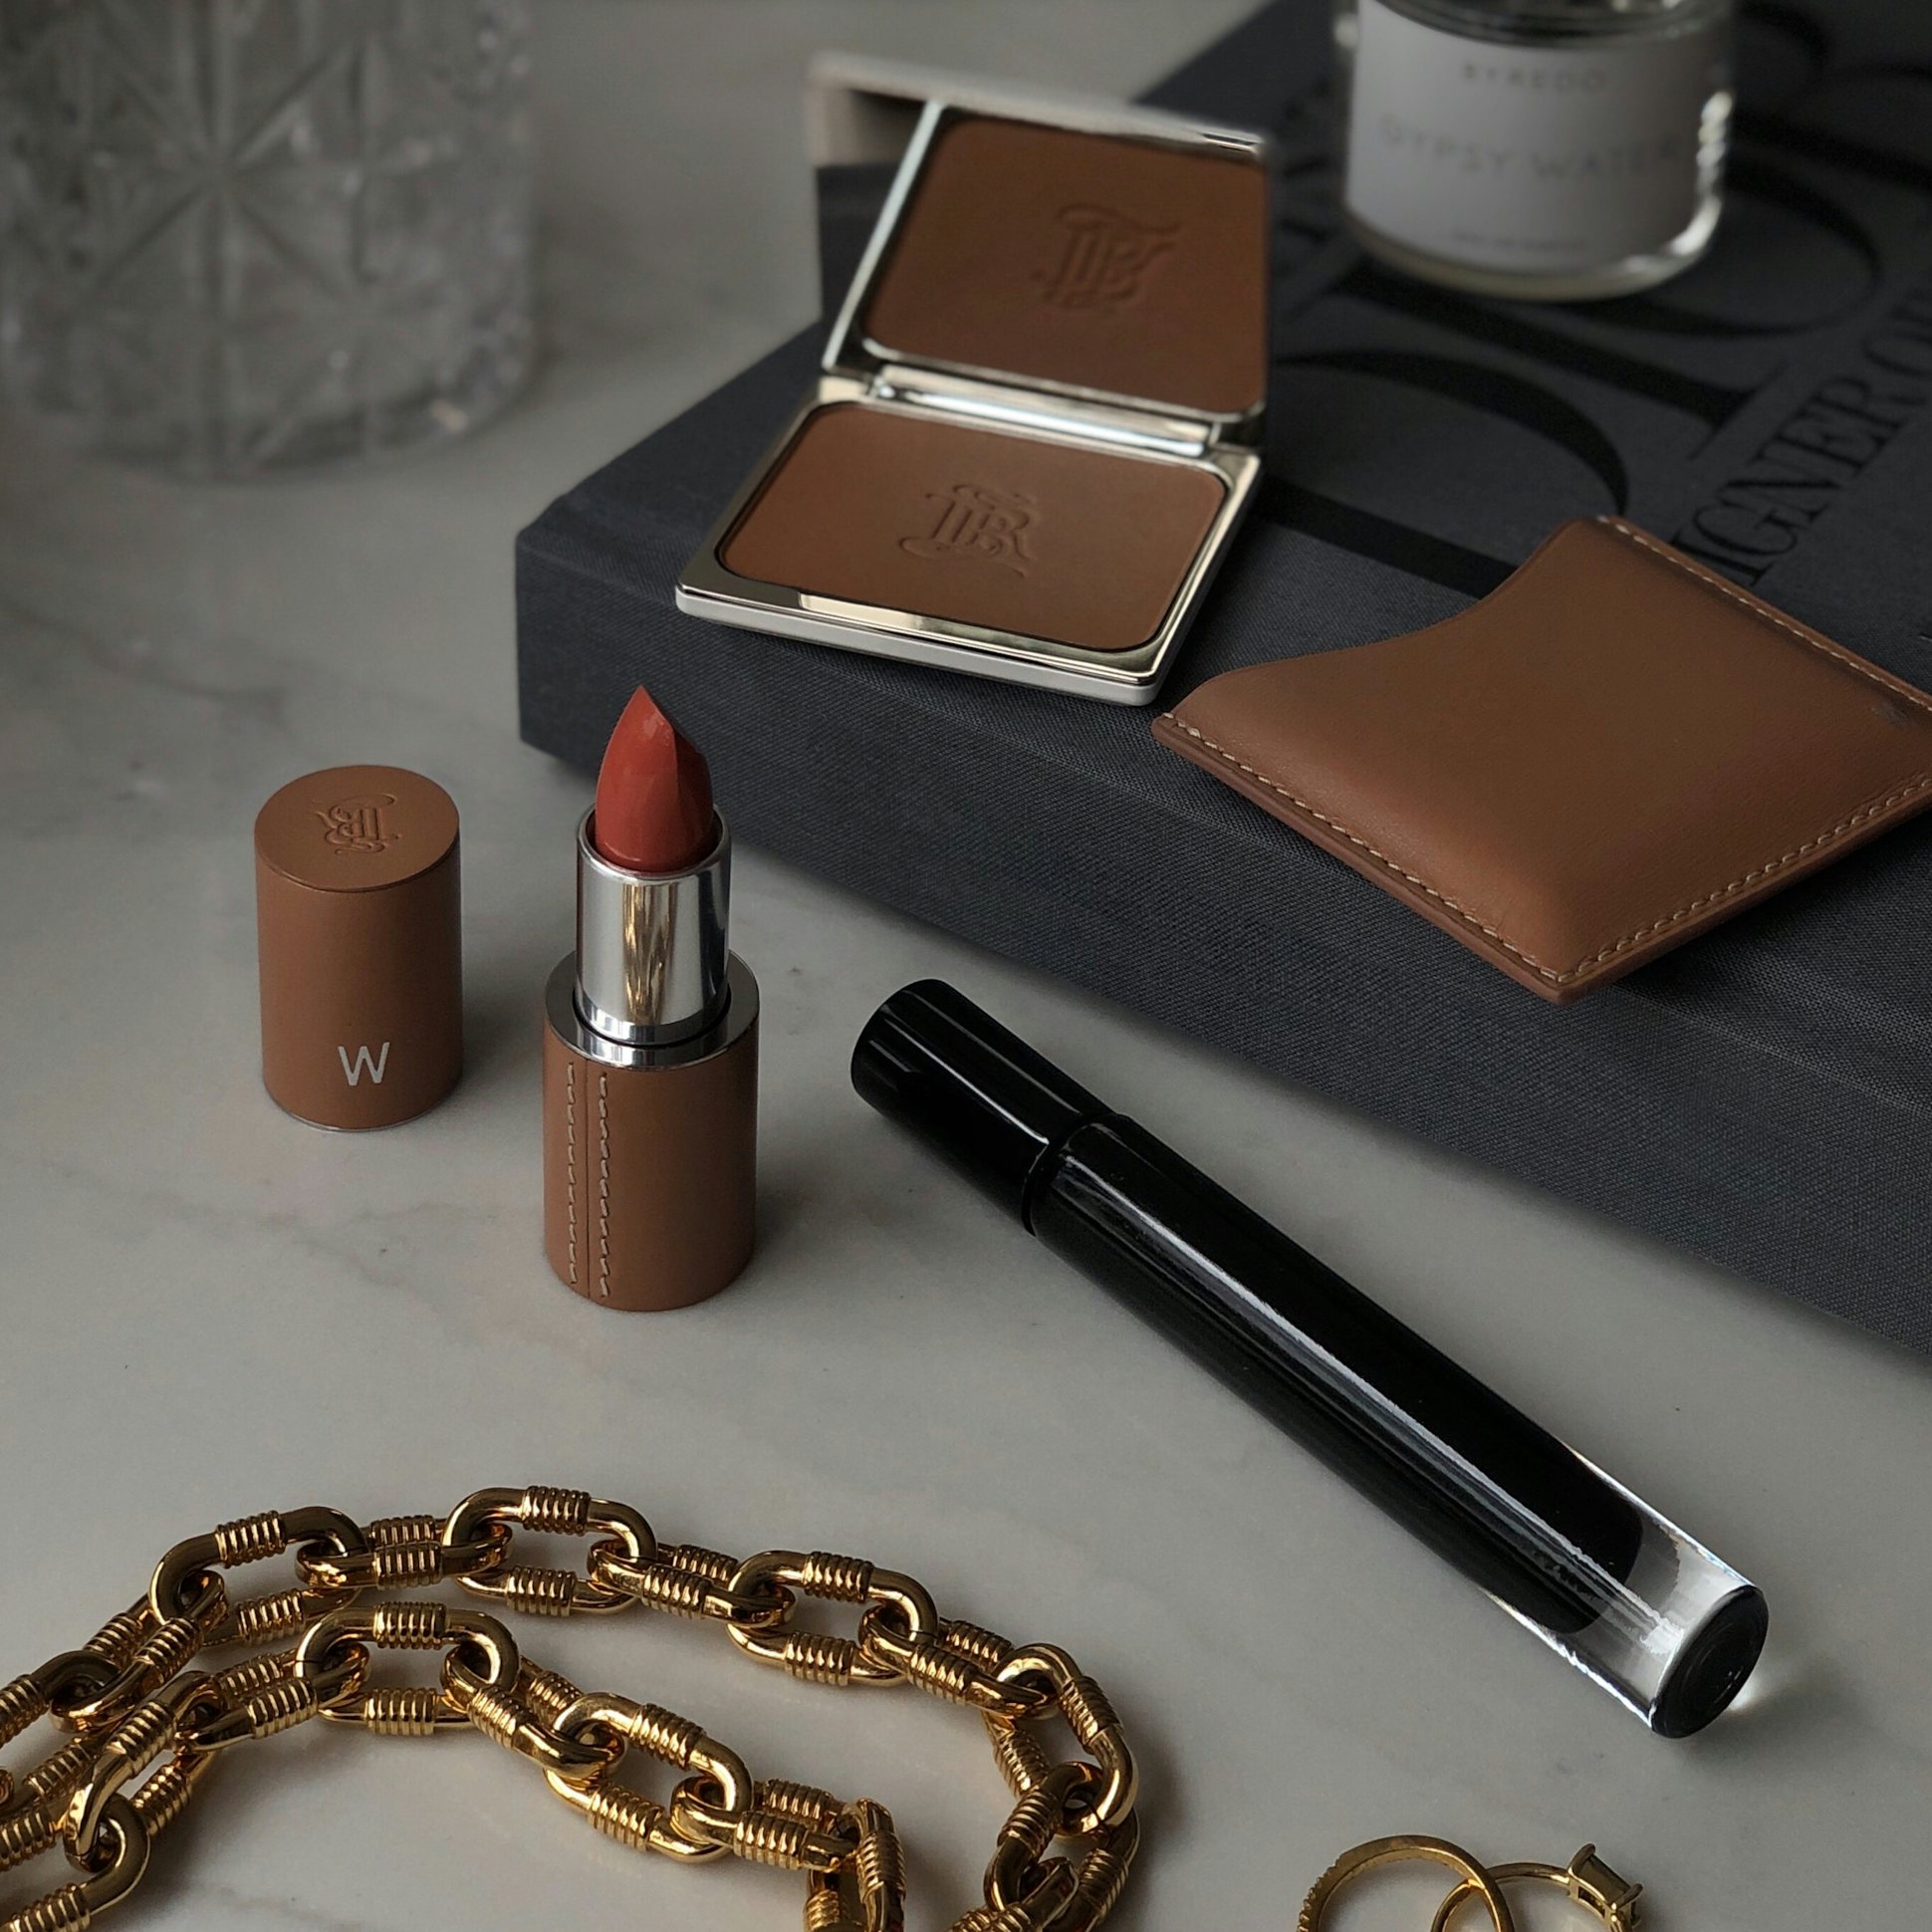 La bouche rouge camel leather family with Le Sérum Noir mascara, La Terre Blonde and a red lipstick shade